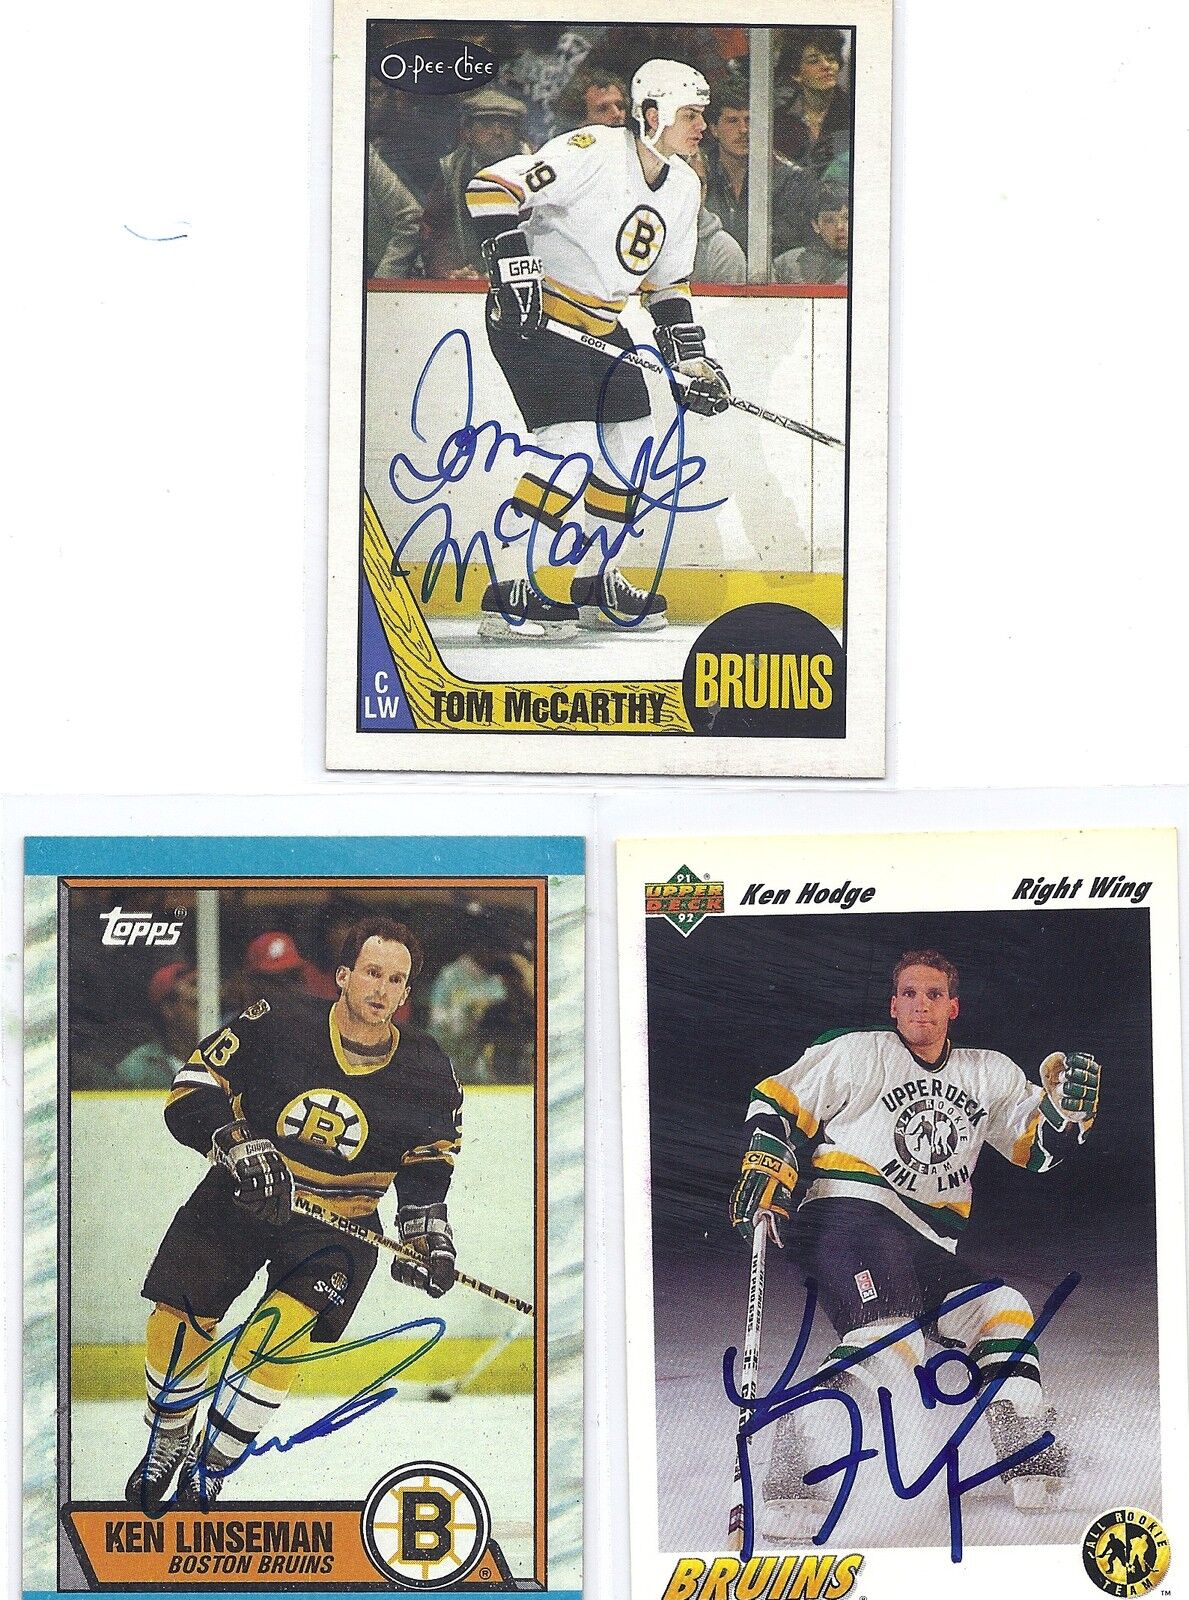 1991-92 UD #41 Ken Hodge Boston Bruins Rookie Signed Autographed Card